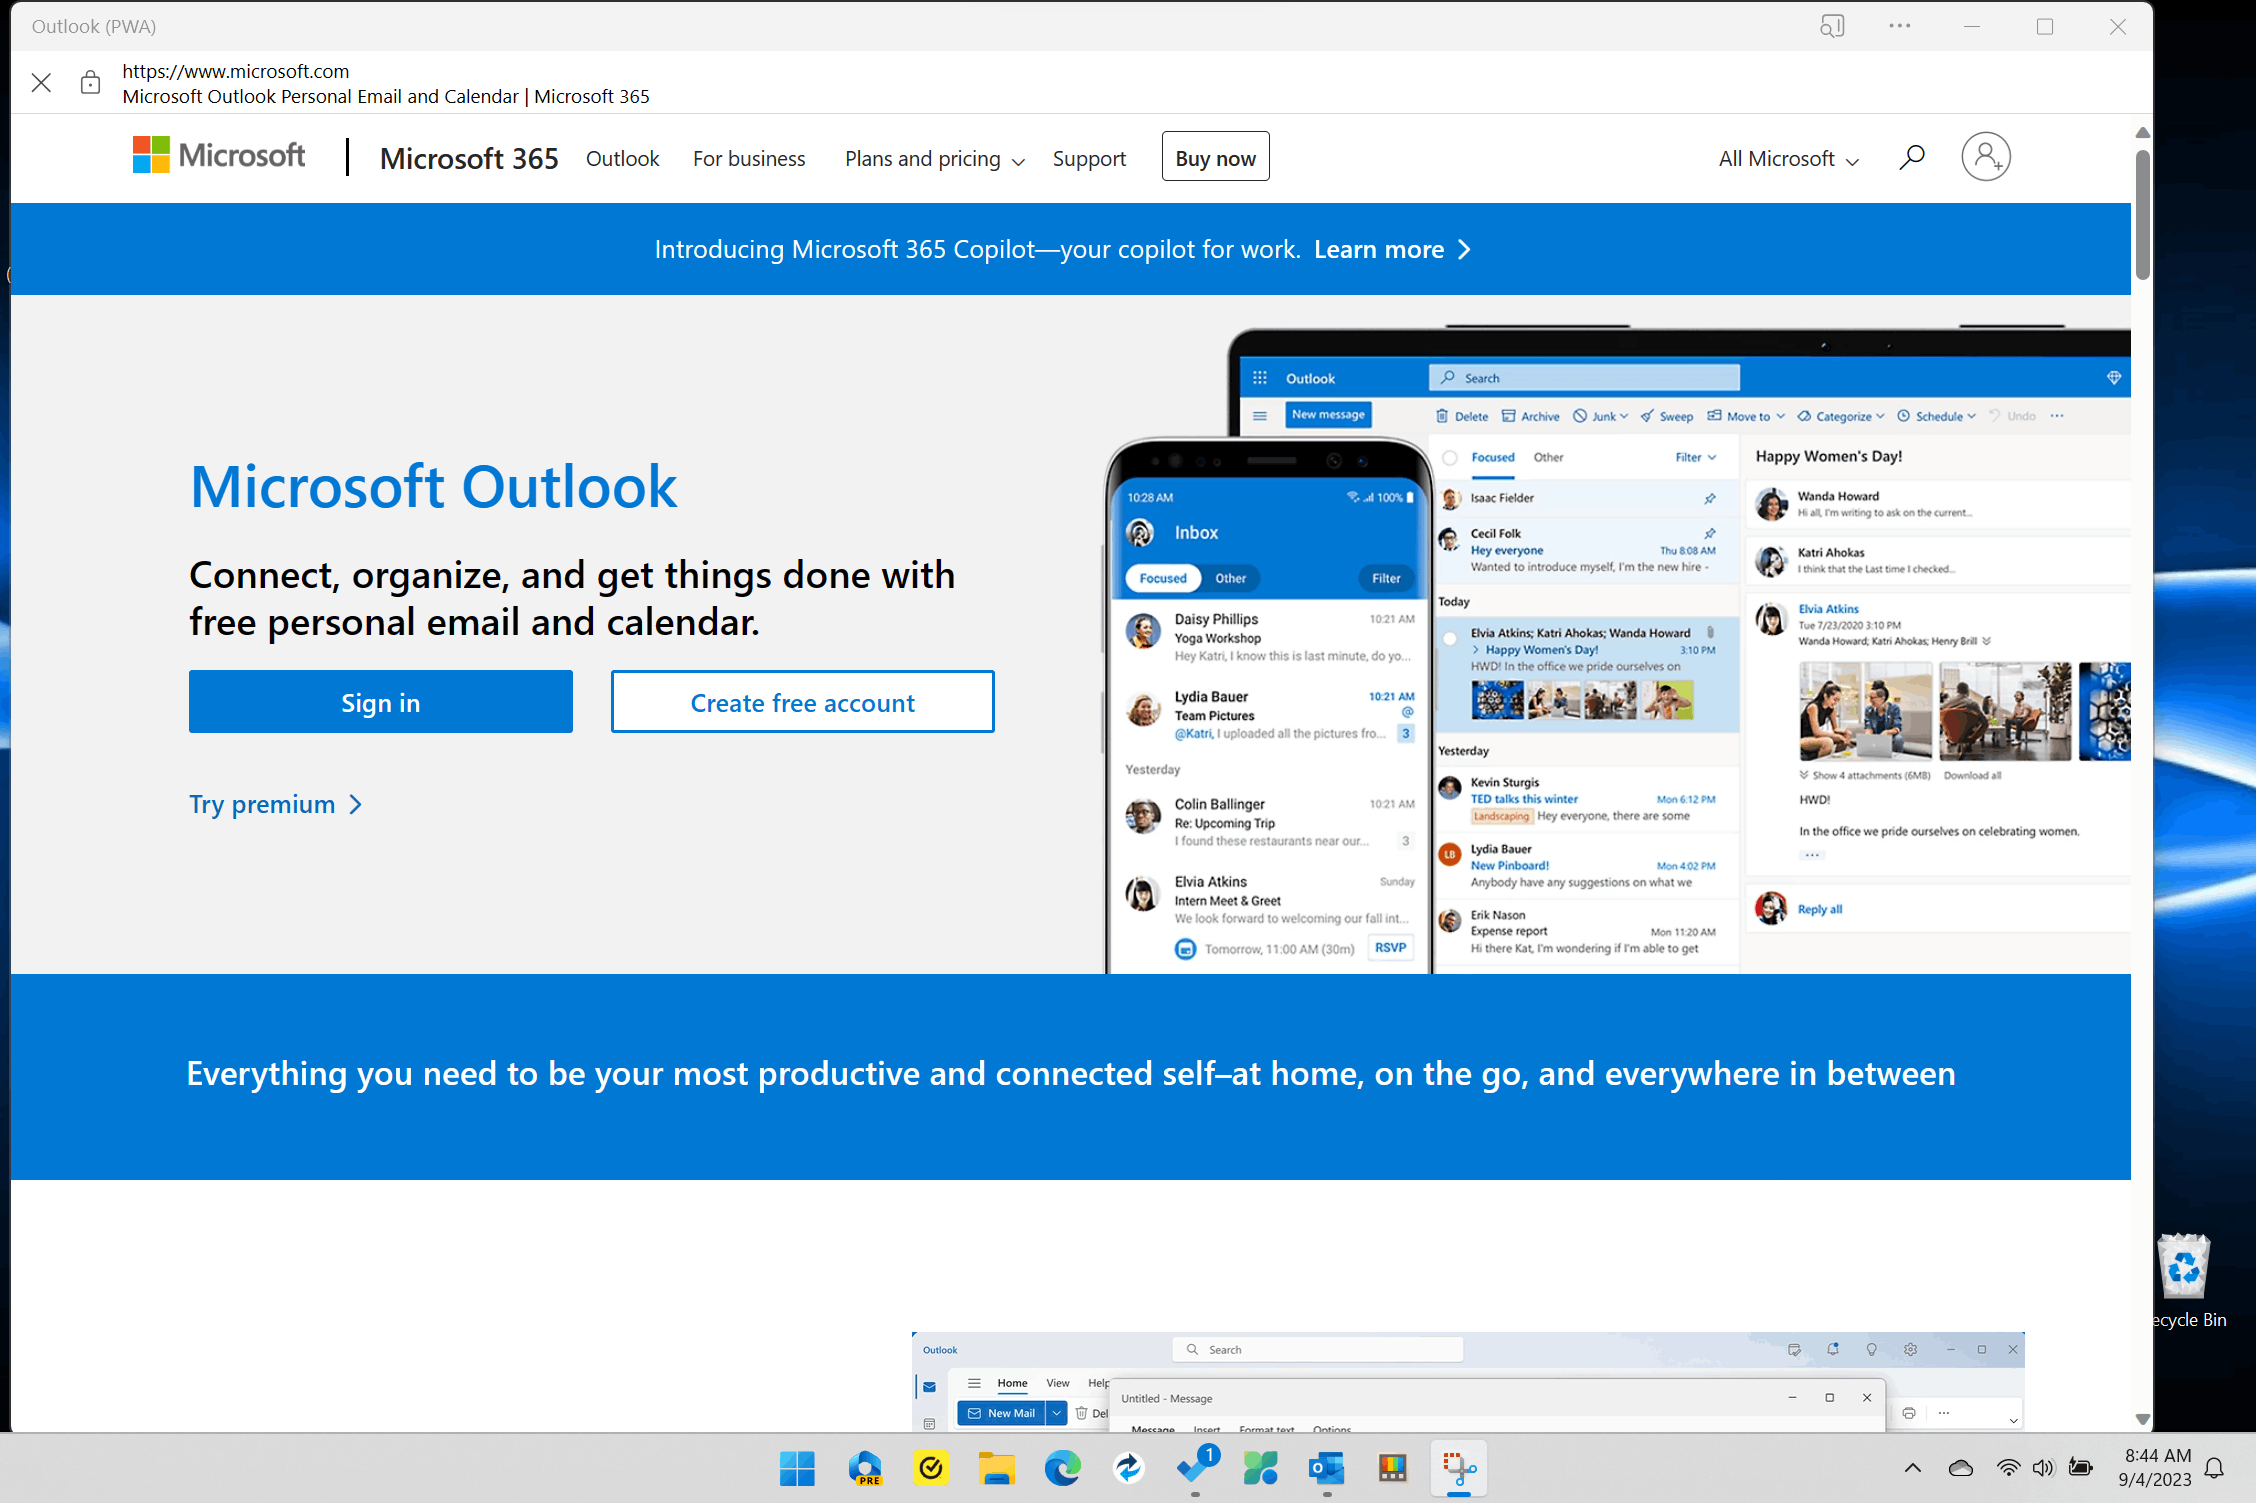 Microsoft's new Outlook email client is live (at least for now)